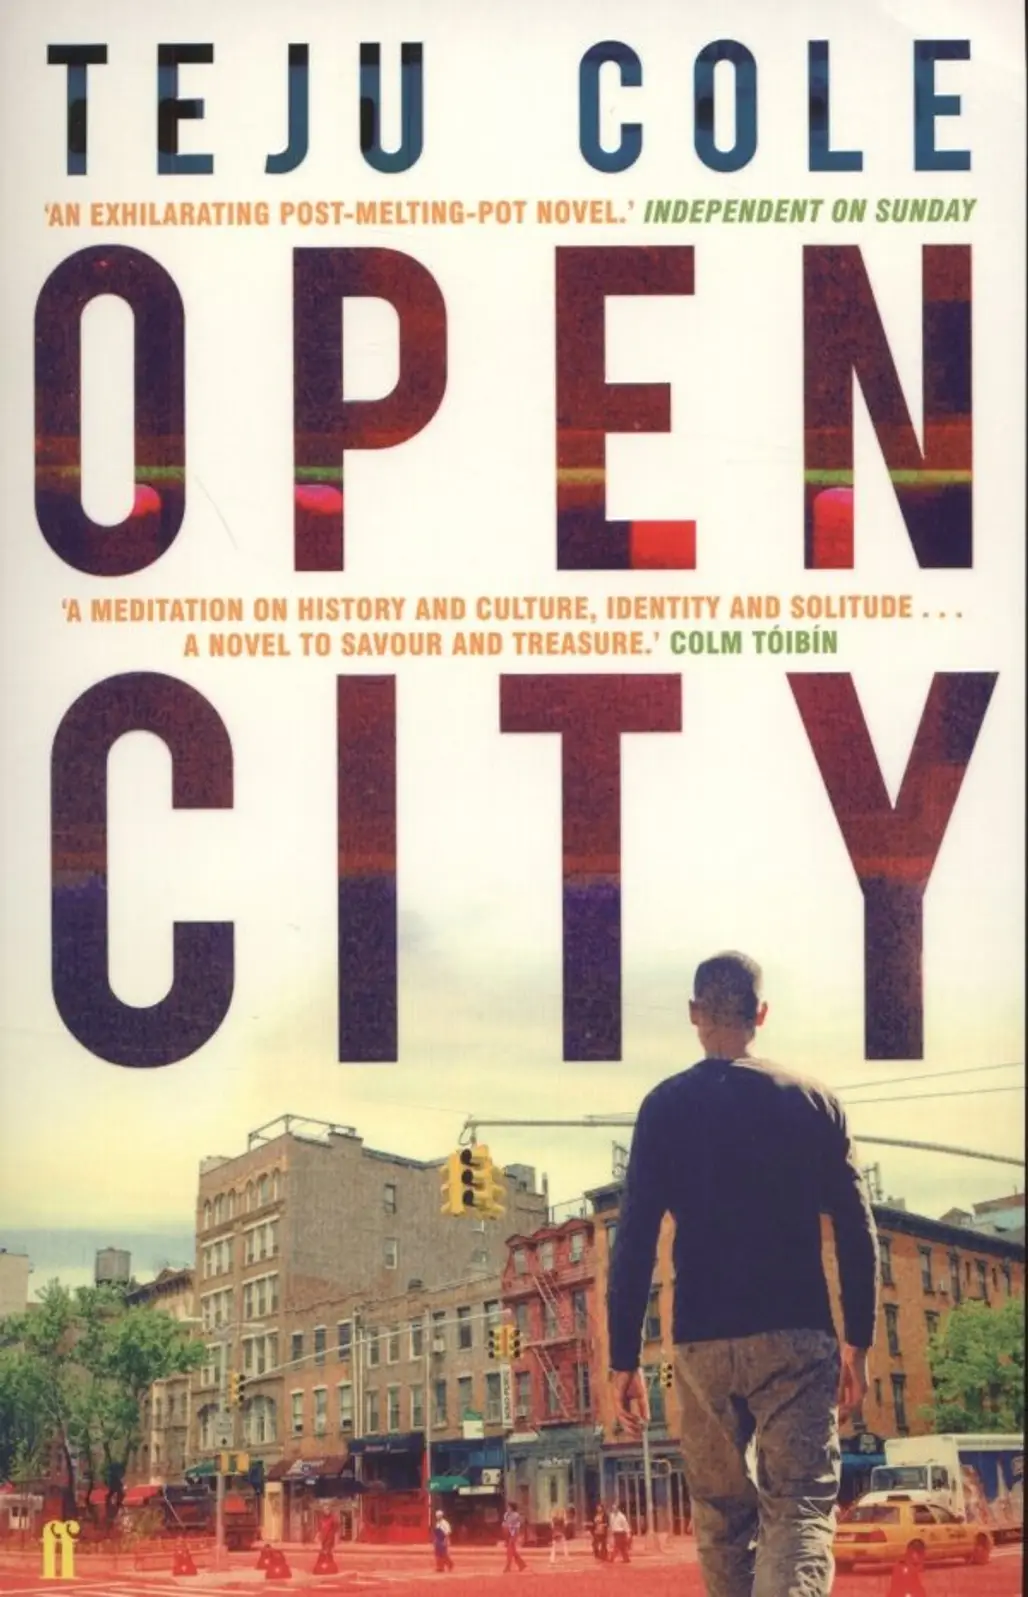 Open City, by Teju Cole